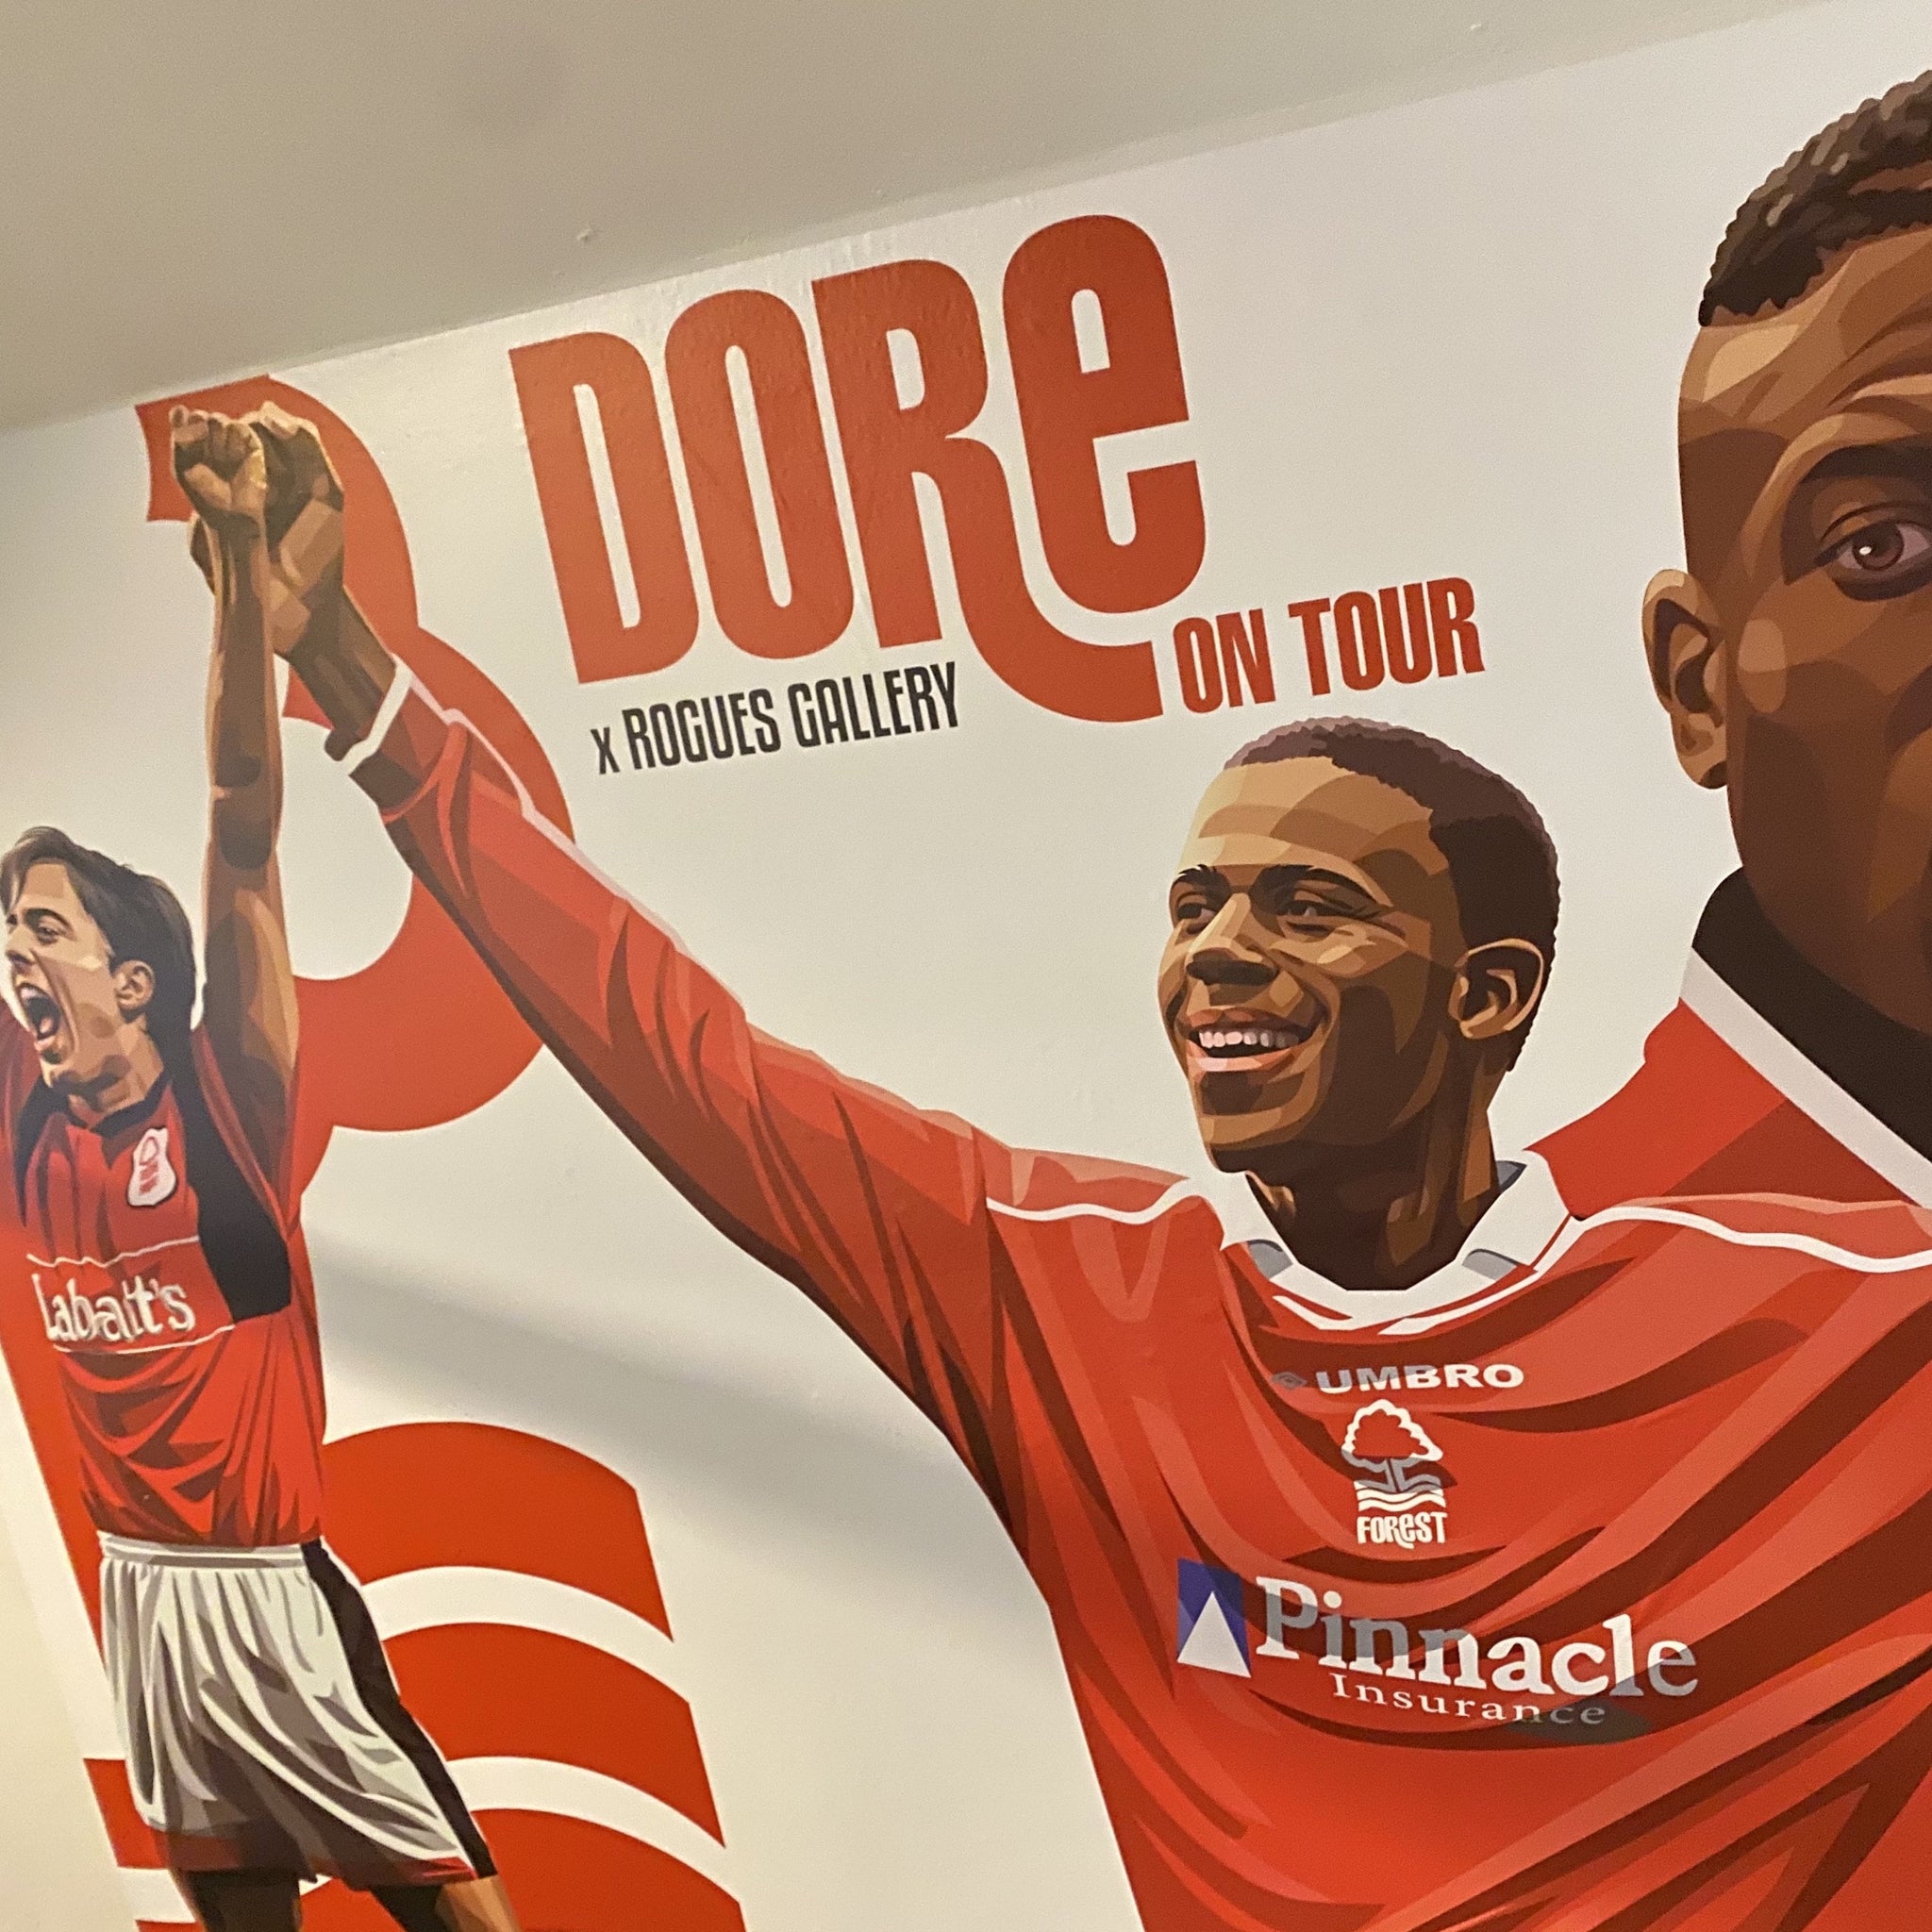 Ian Woan Bart-Williams Rogues' Gallery custom wall vinyls Dore On Tour Nottingham Forest